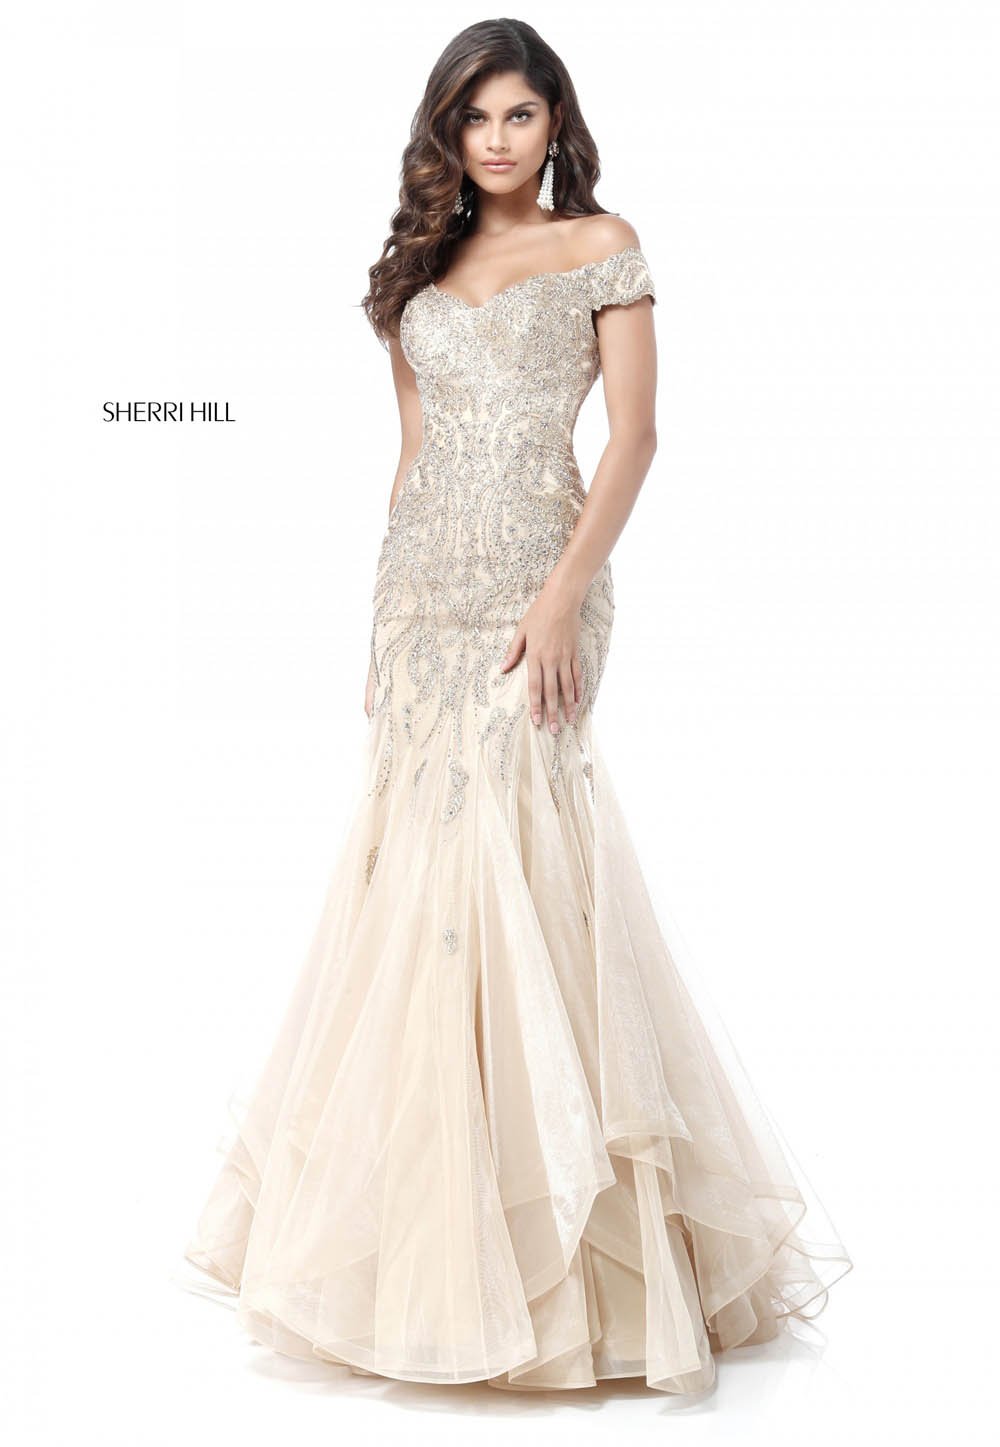 Sherri Hill 51618 dress images in these colors: Gold, Black, Wine, Blush Gold, Gunmetal, Ivory Gold.